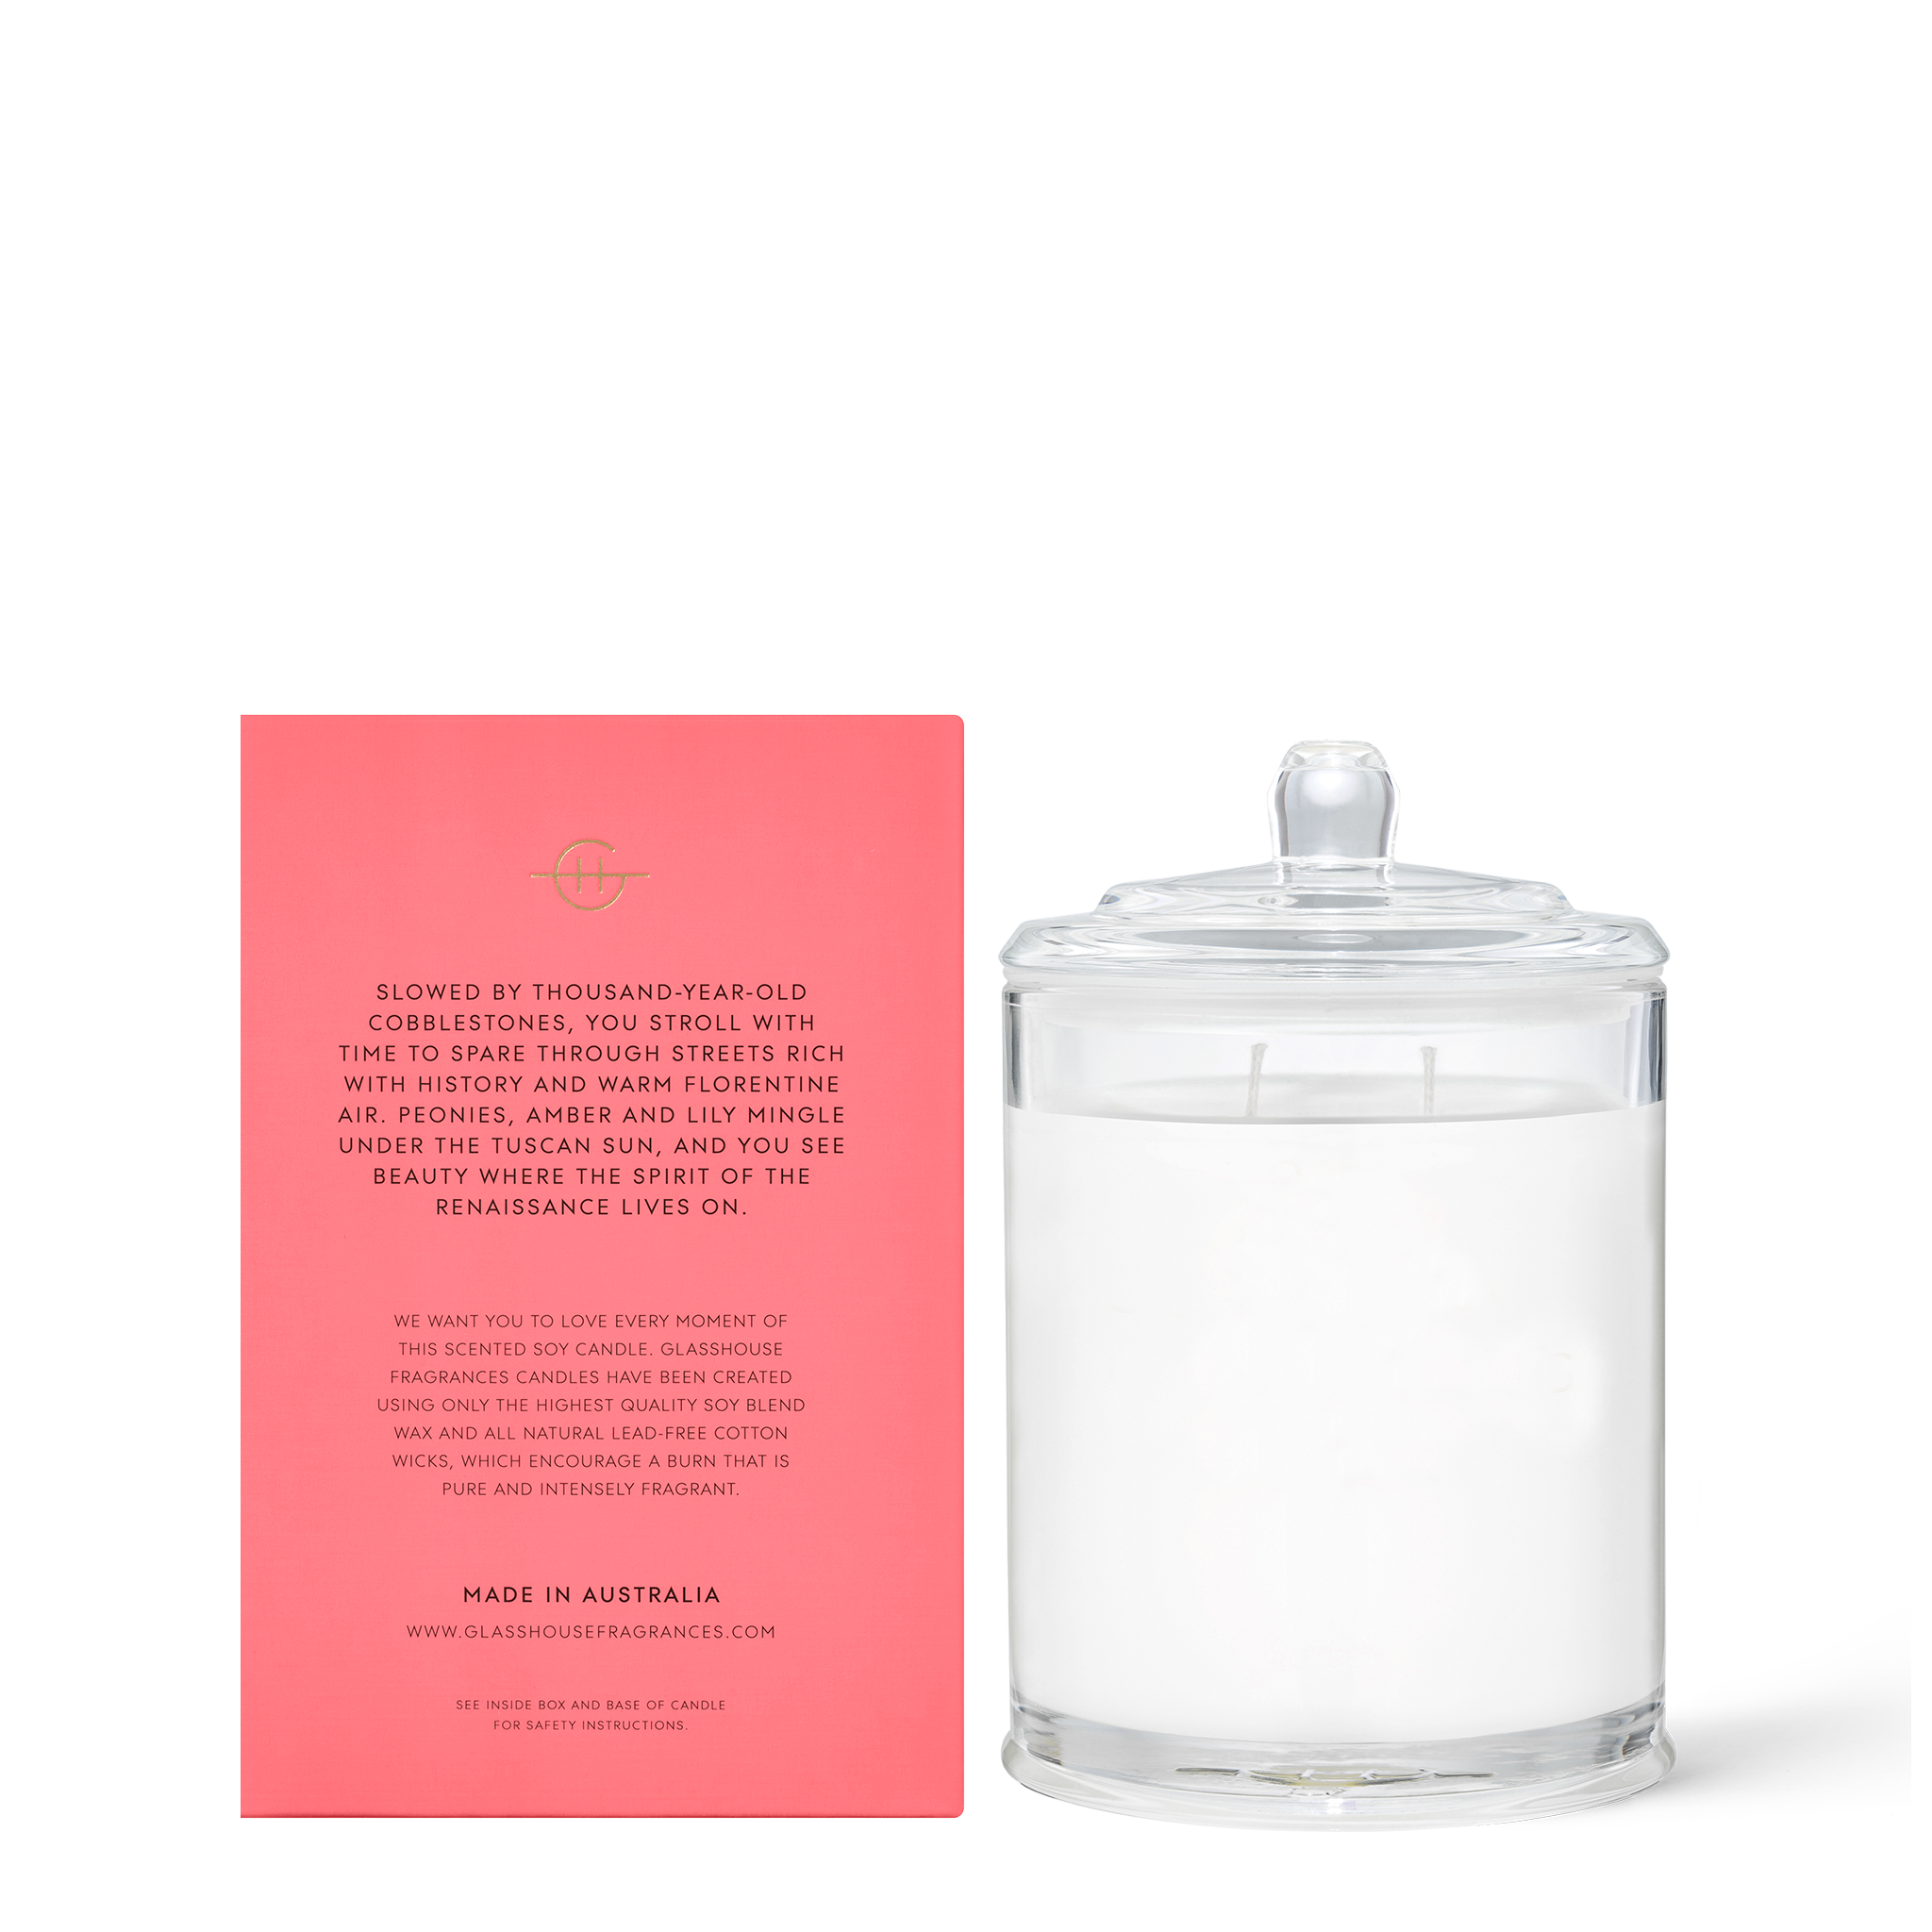 GLASSHOUSE | FOREVER FLORENCE - 380G CANDLE